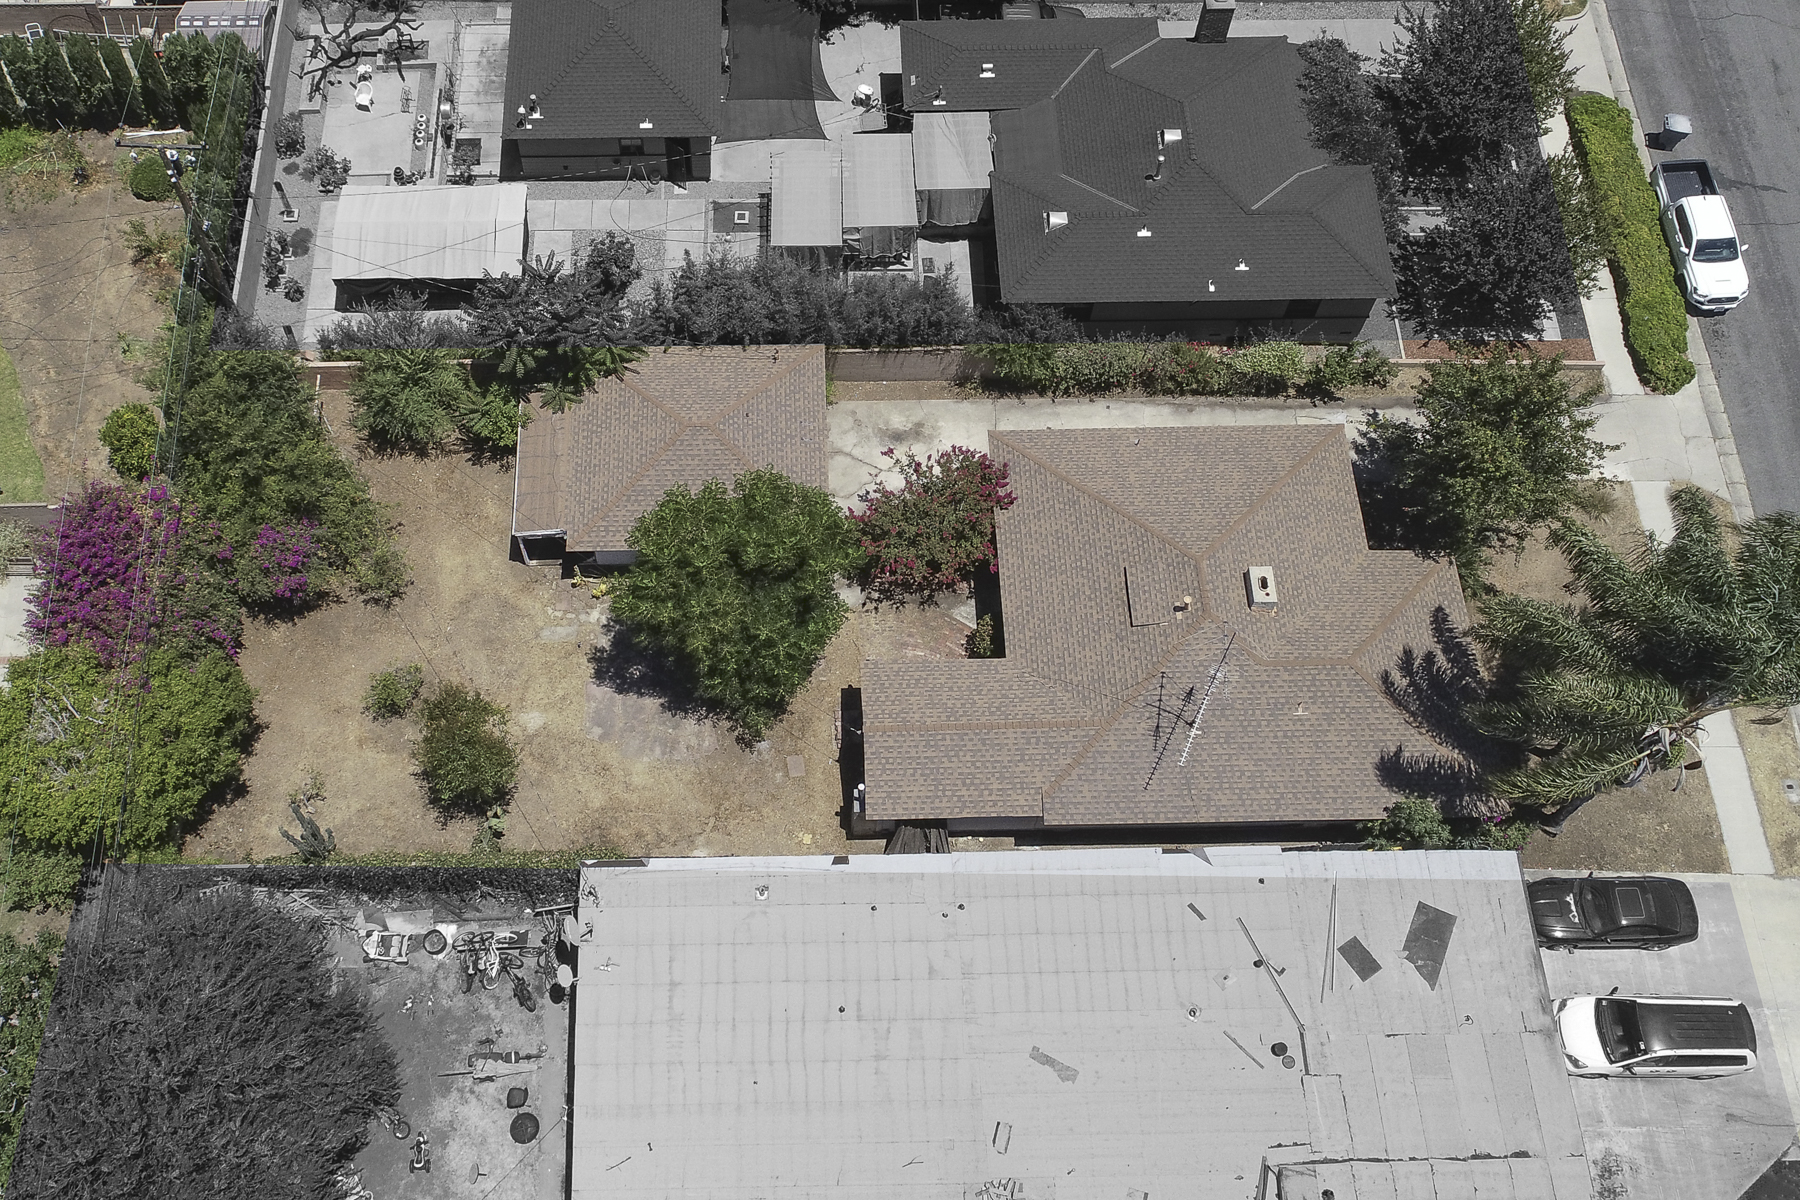 319 E. Francis Ave, La Habra, CA 90631 - Top View Angled - Grayed Out Neighbors